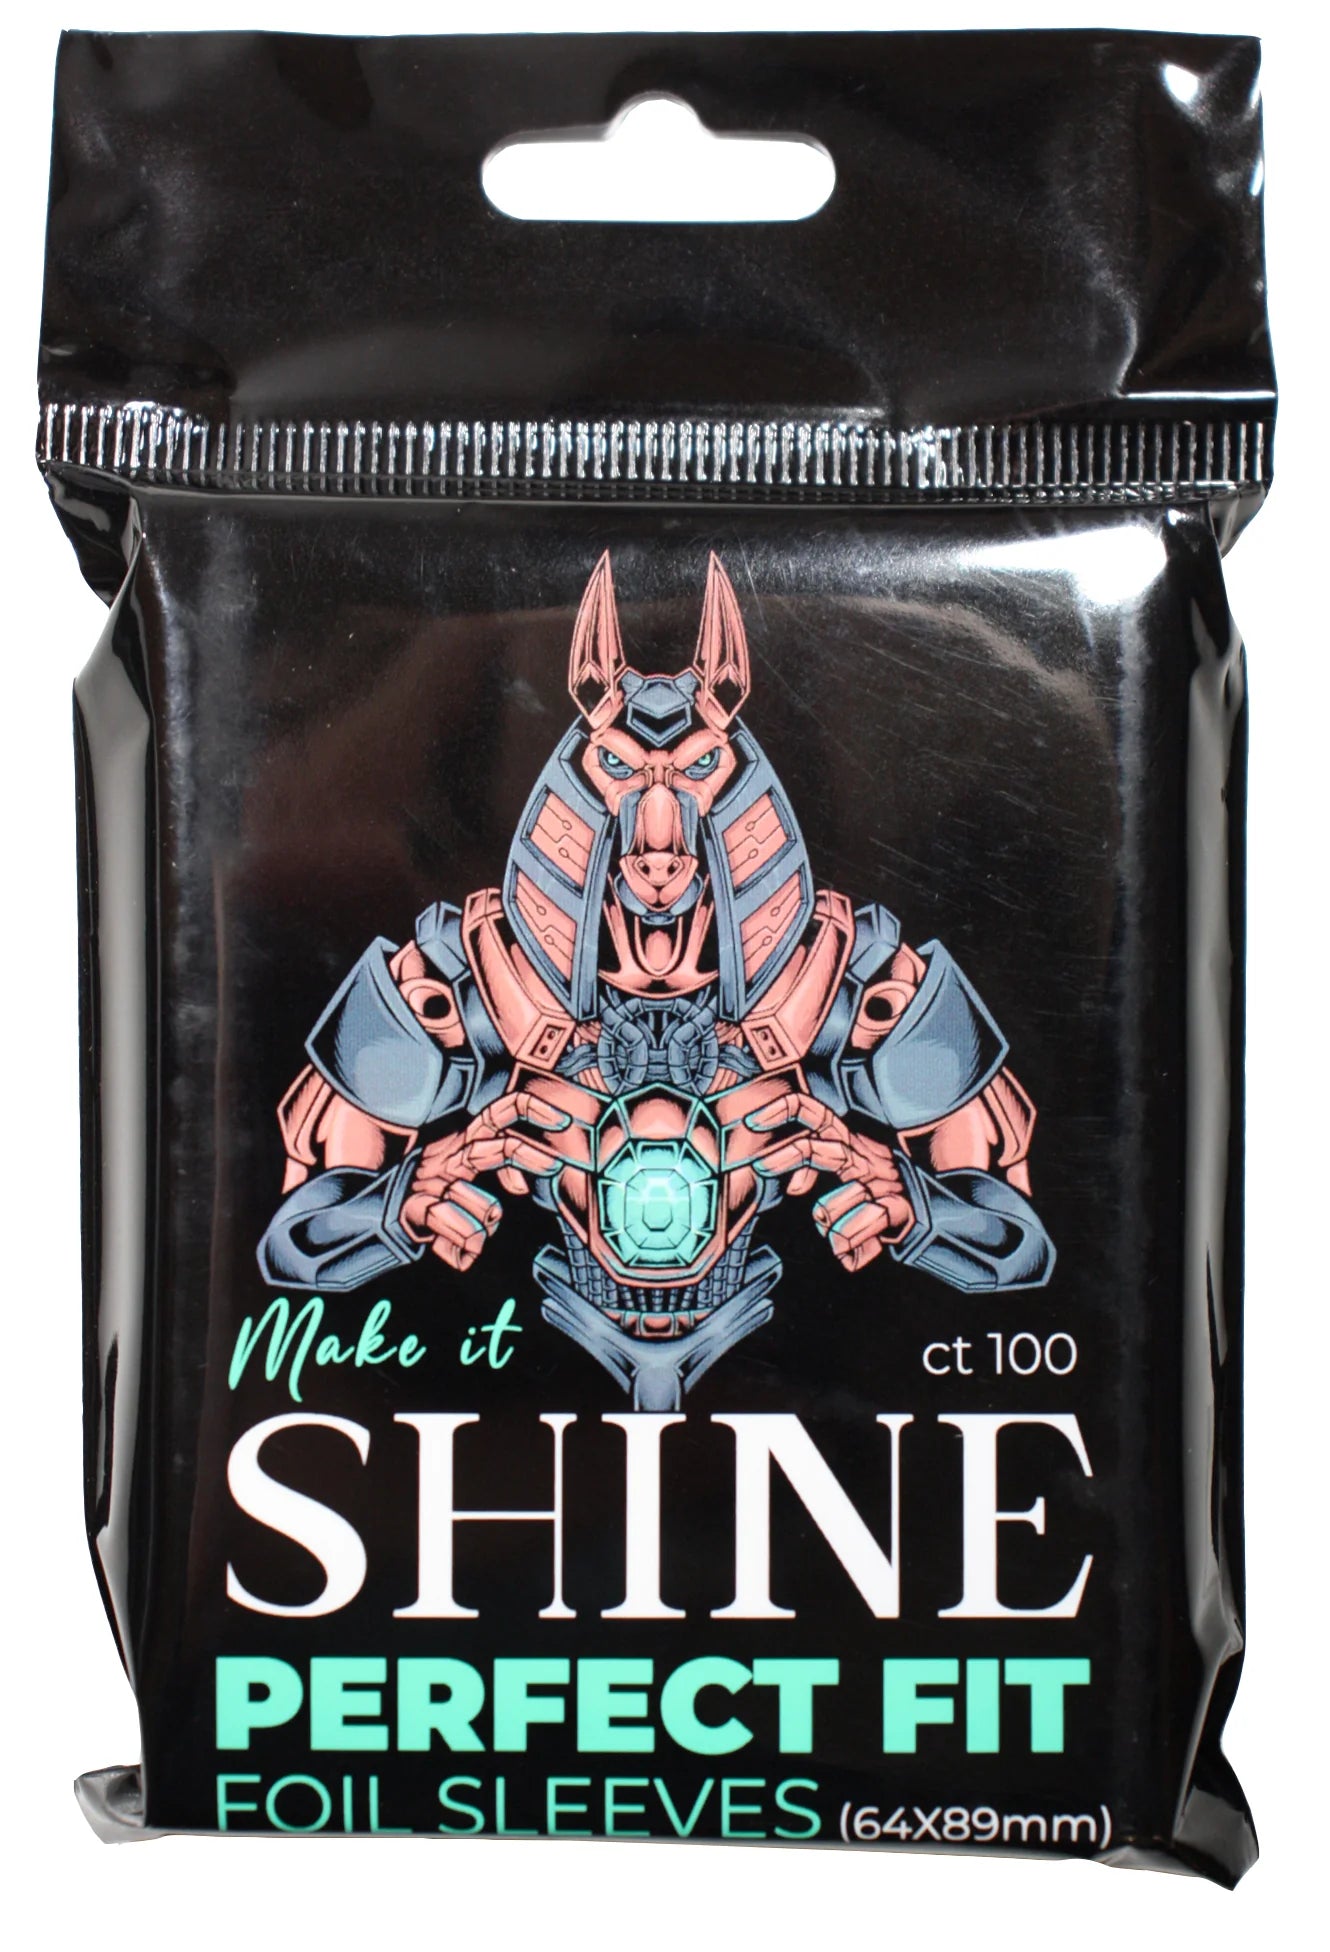 Make it Shine - Perfect Fit Sleeves Premium Foil ct100 (64x89mm)